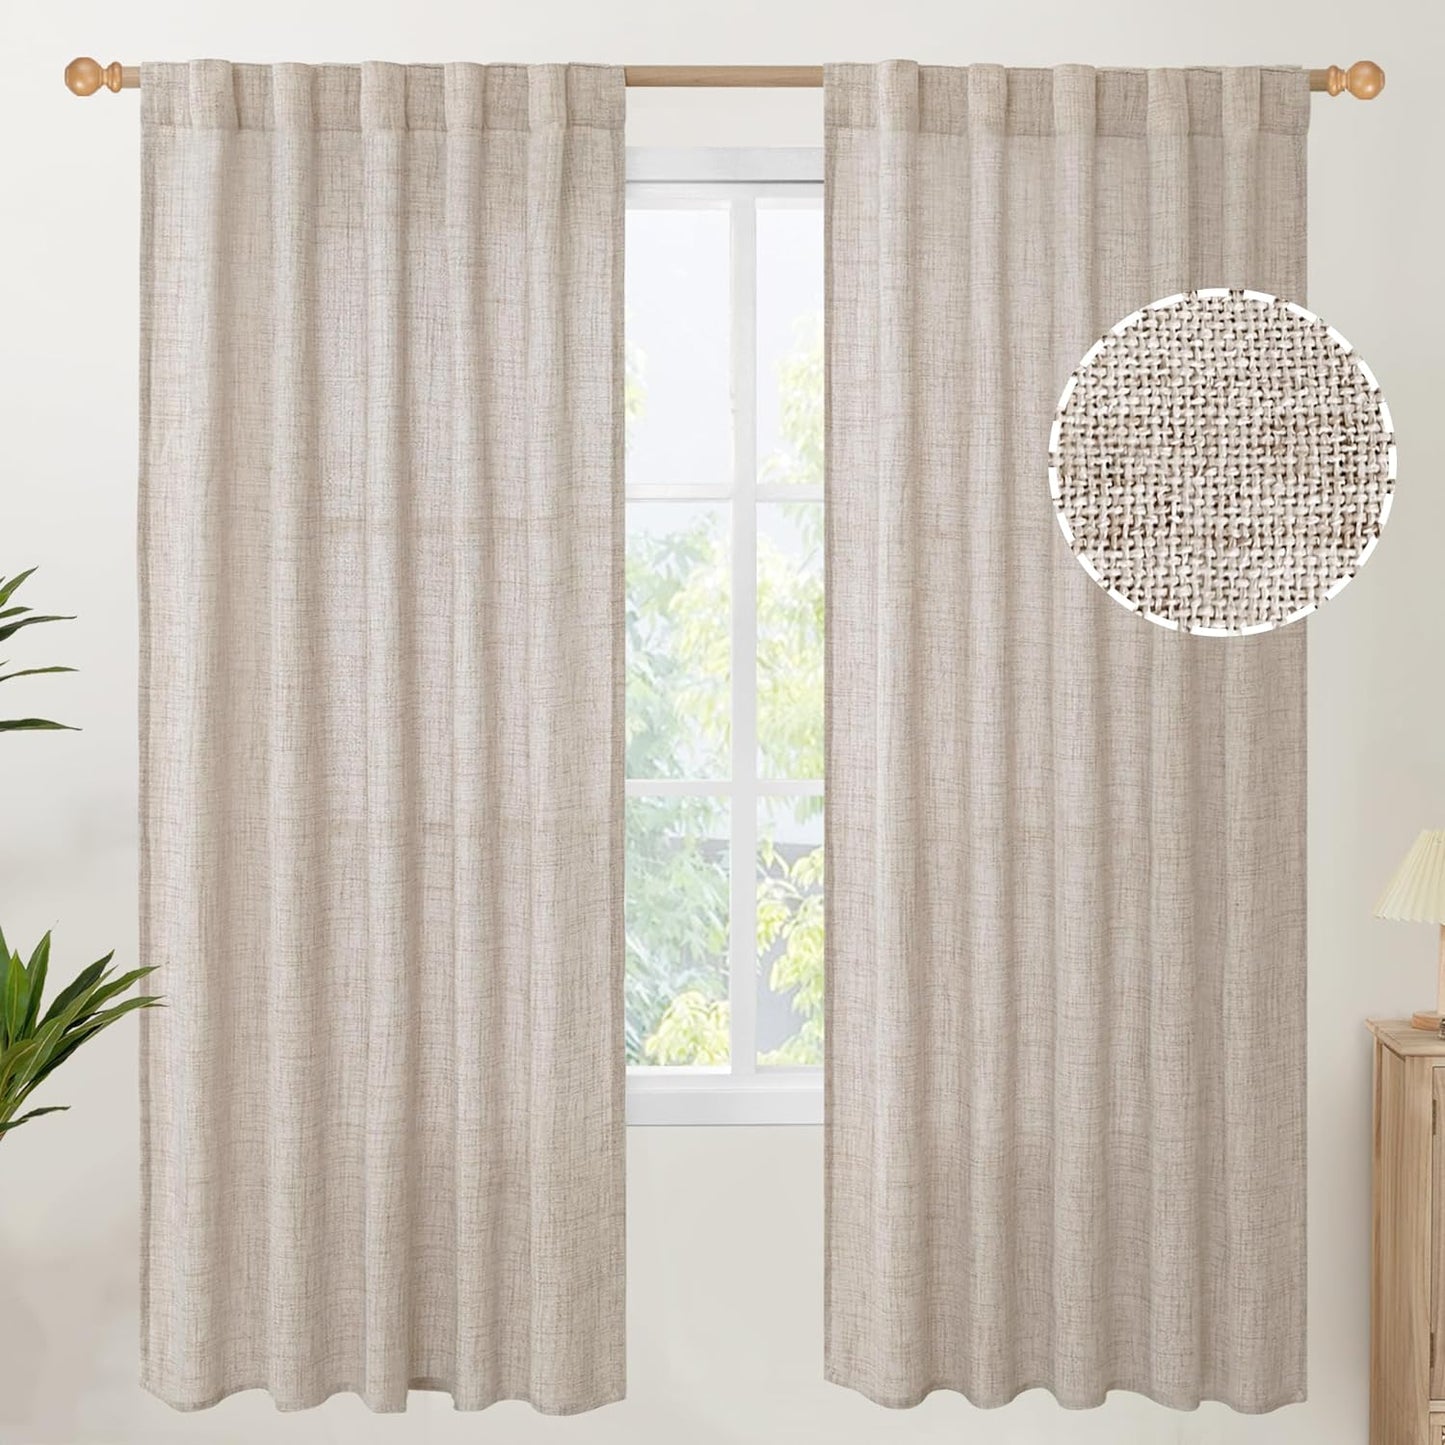 Youngstex Natural Linen Curtains 72 Inch Length 2 Panels for Living Room Light Filtering Textured Window Drapes for Bedroom Dining Office Back Tab Rod Pocket, 52 X 72 Inch  YoungsTex Natural 42W X 72L 